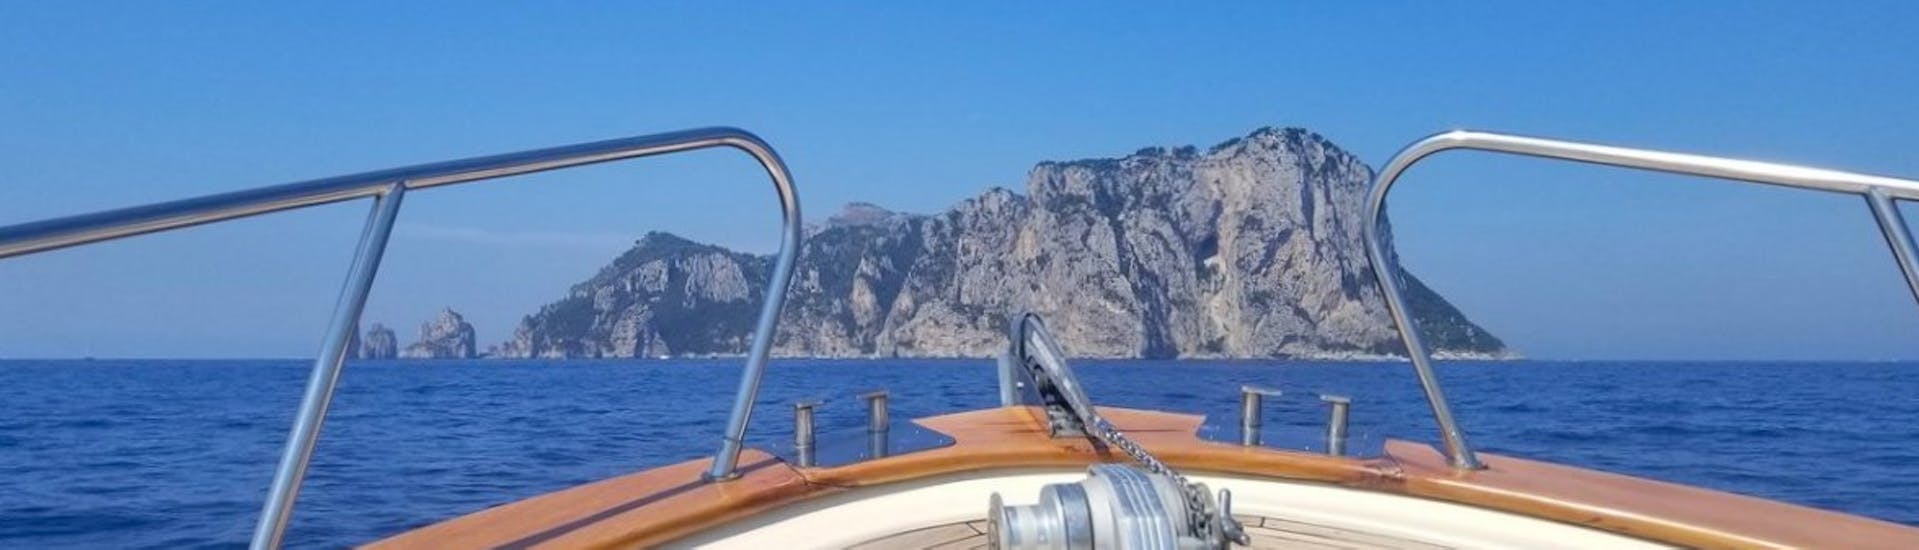 Boat Trip to Capri and its Caves with Swimming Stop & Welcome Drink.